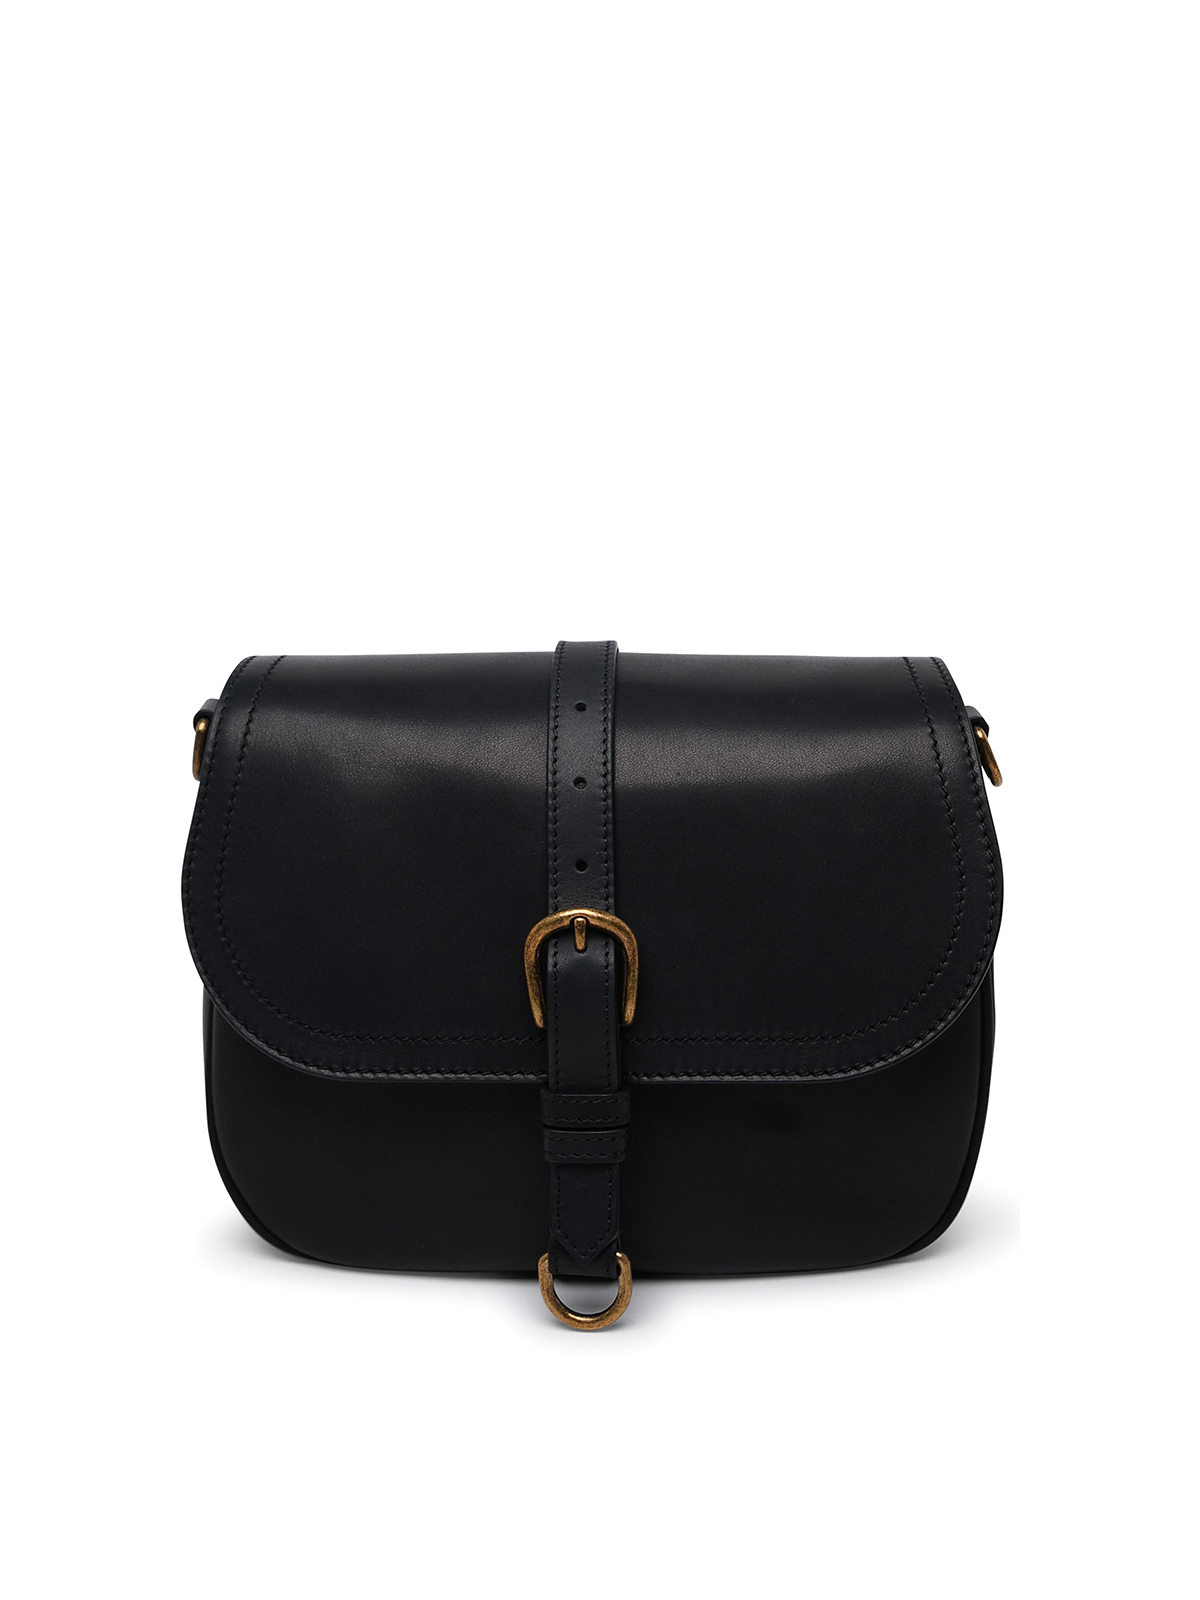 Golden Goose - Medium Sally Bag in Black Leather with Buckle and Shoulder Strap, Woman, Size: U